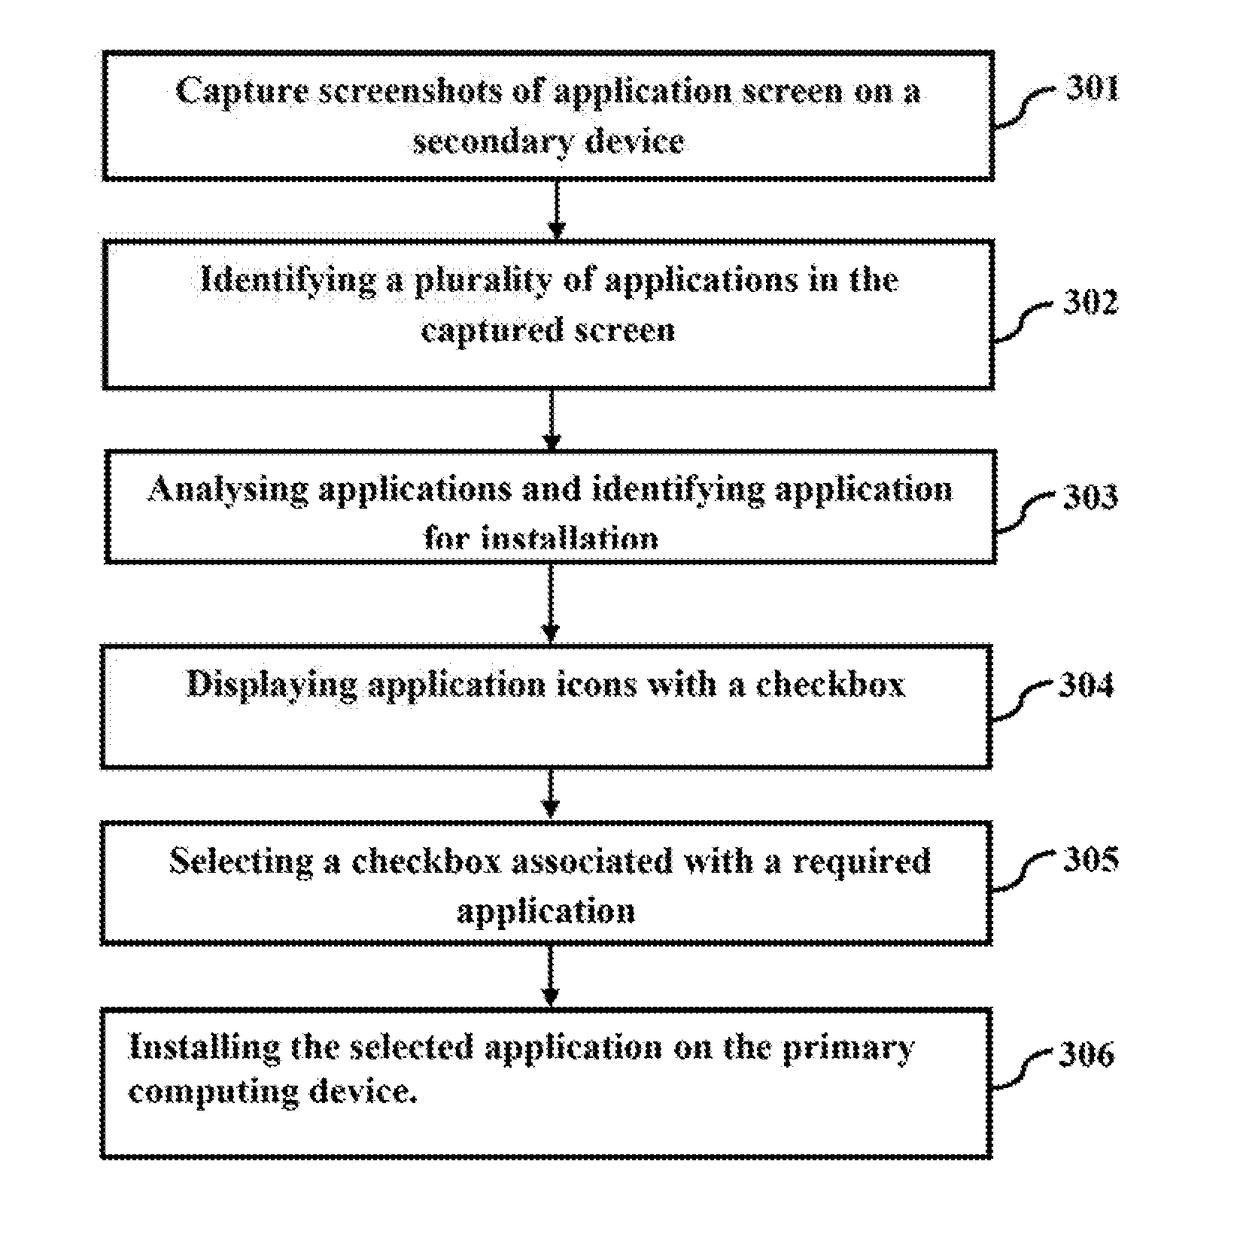 System and method for recommendation and smart installation of applications on a computing device